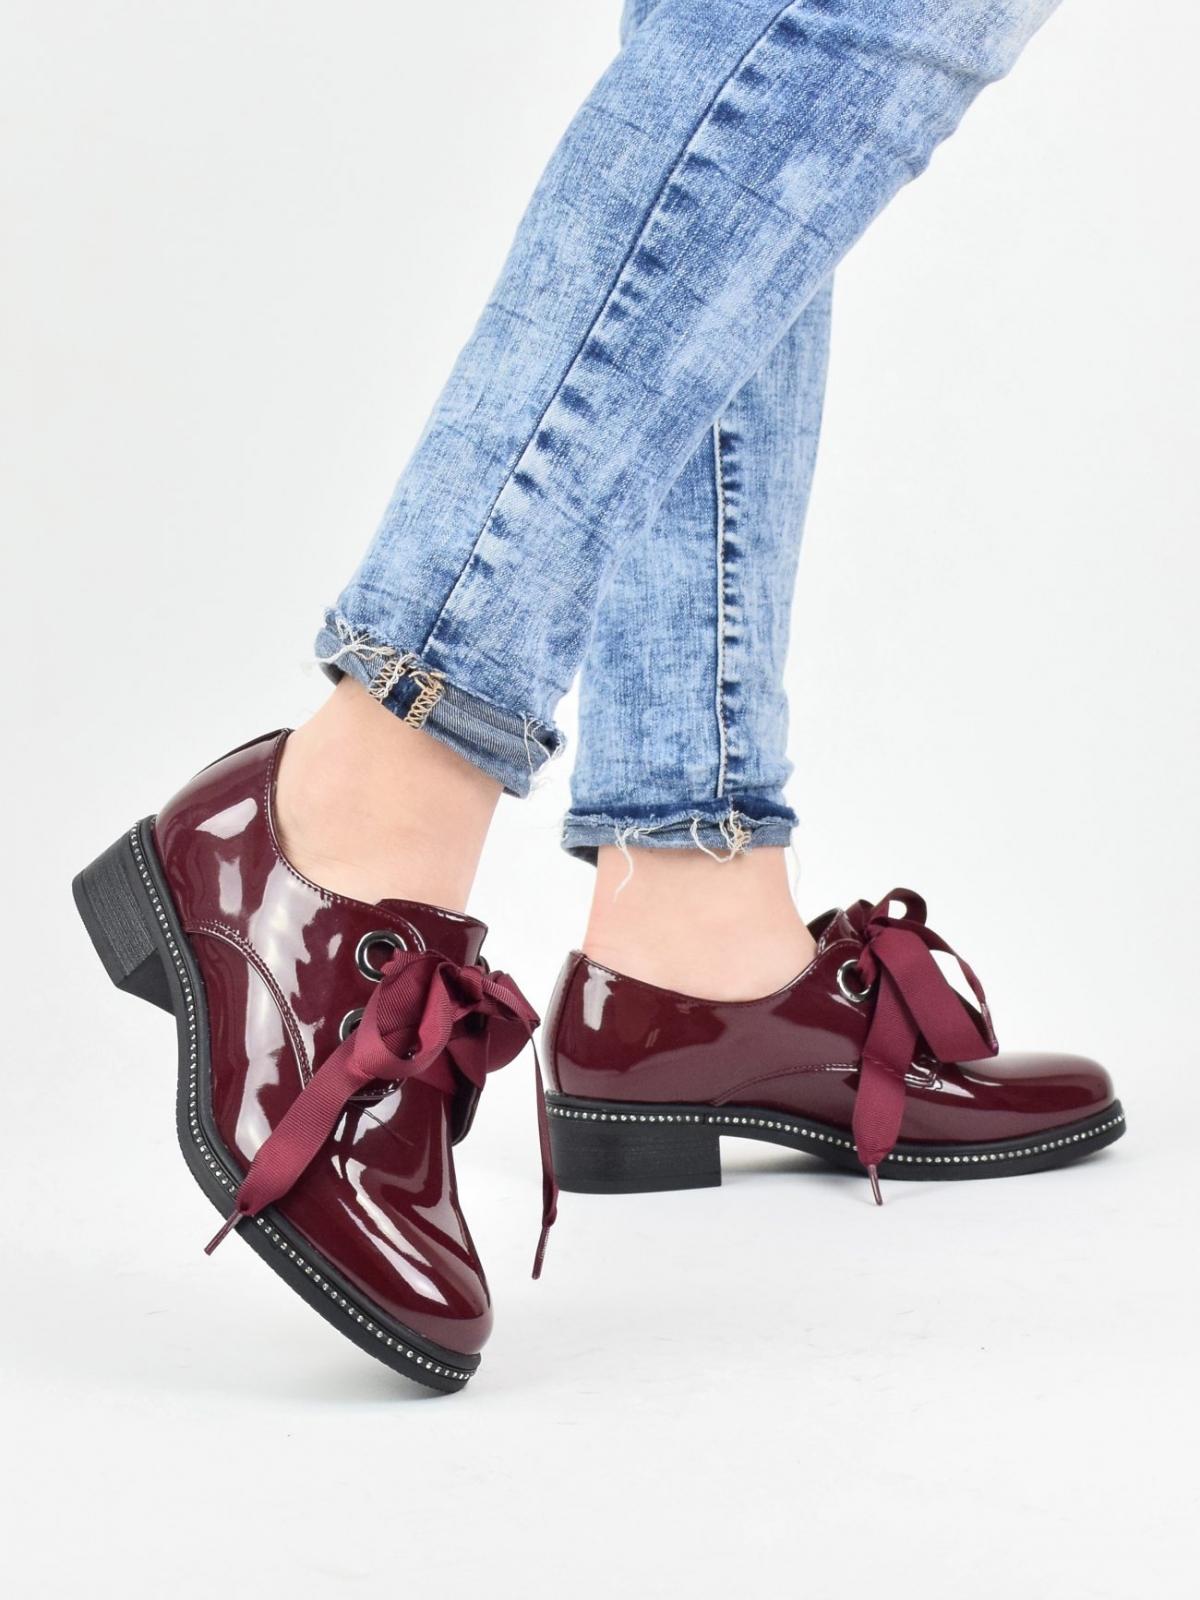 Classic design flat shoes with ribbons in burgundy